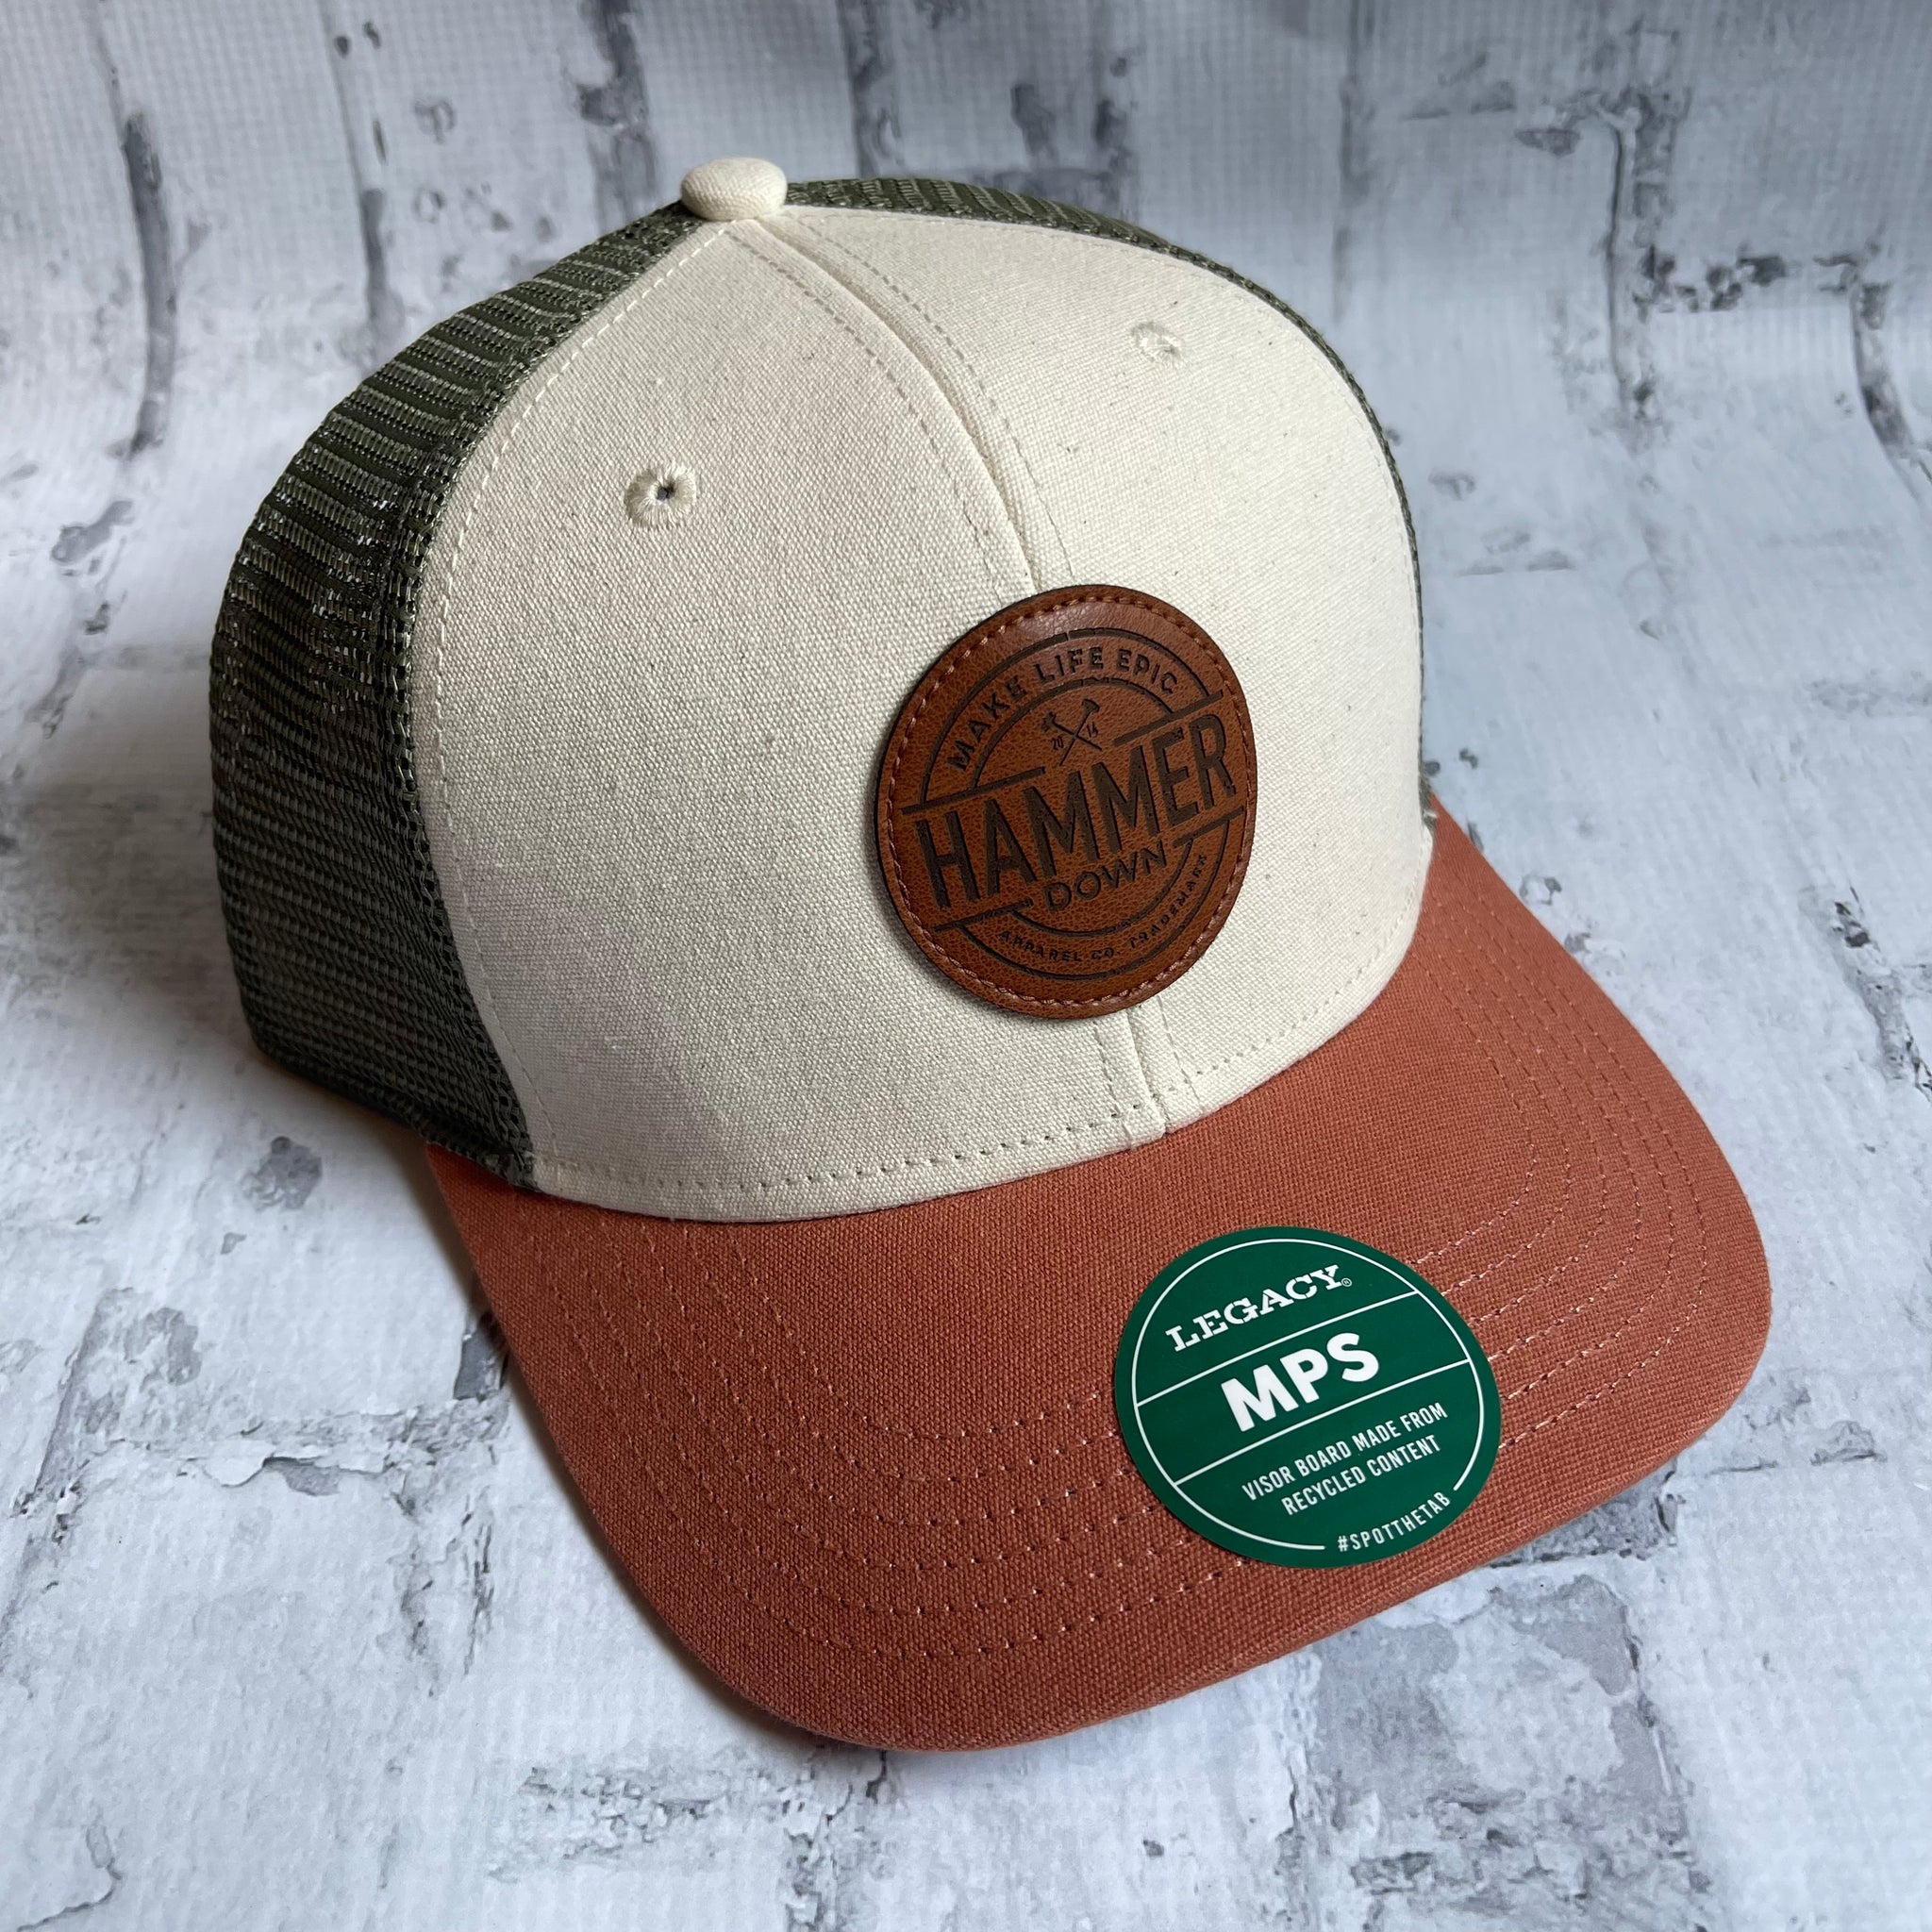 Hammer Down "MLE Badge" Hat - White and Rust Coral with Leather Patch - Southern Charm "Shop The Charm"